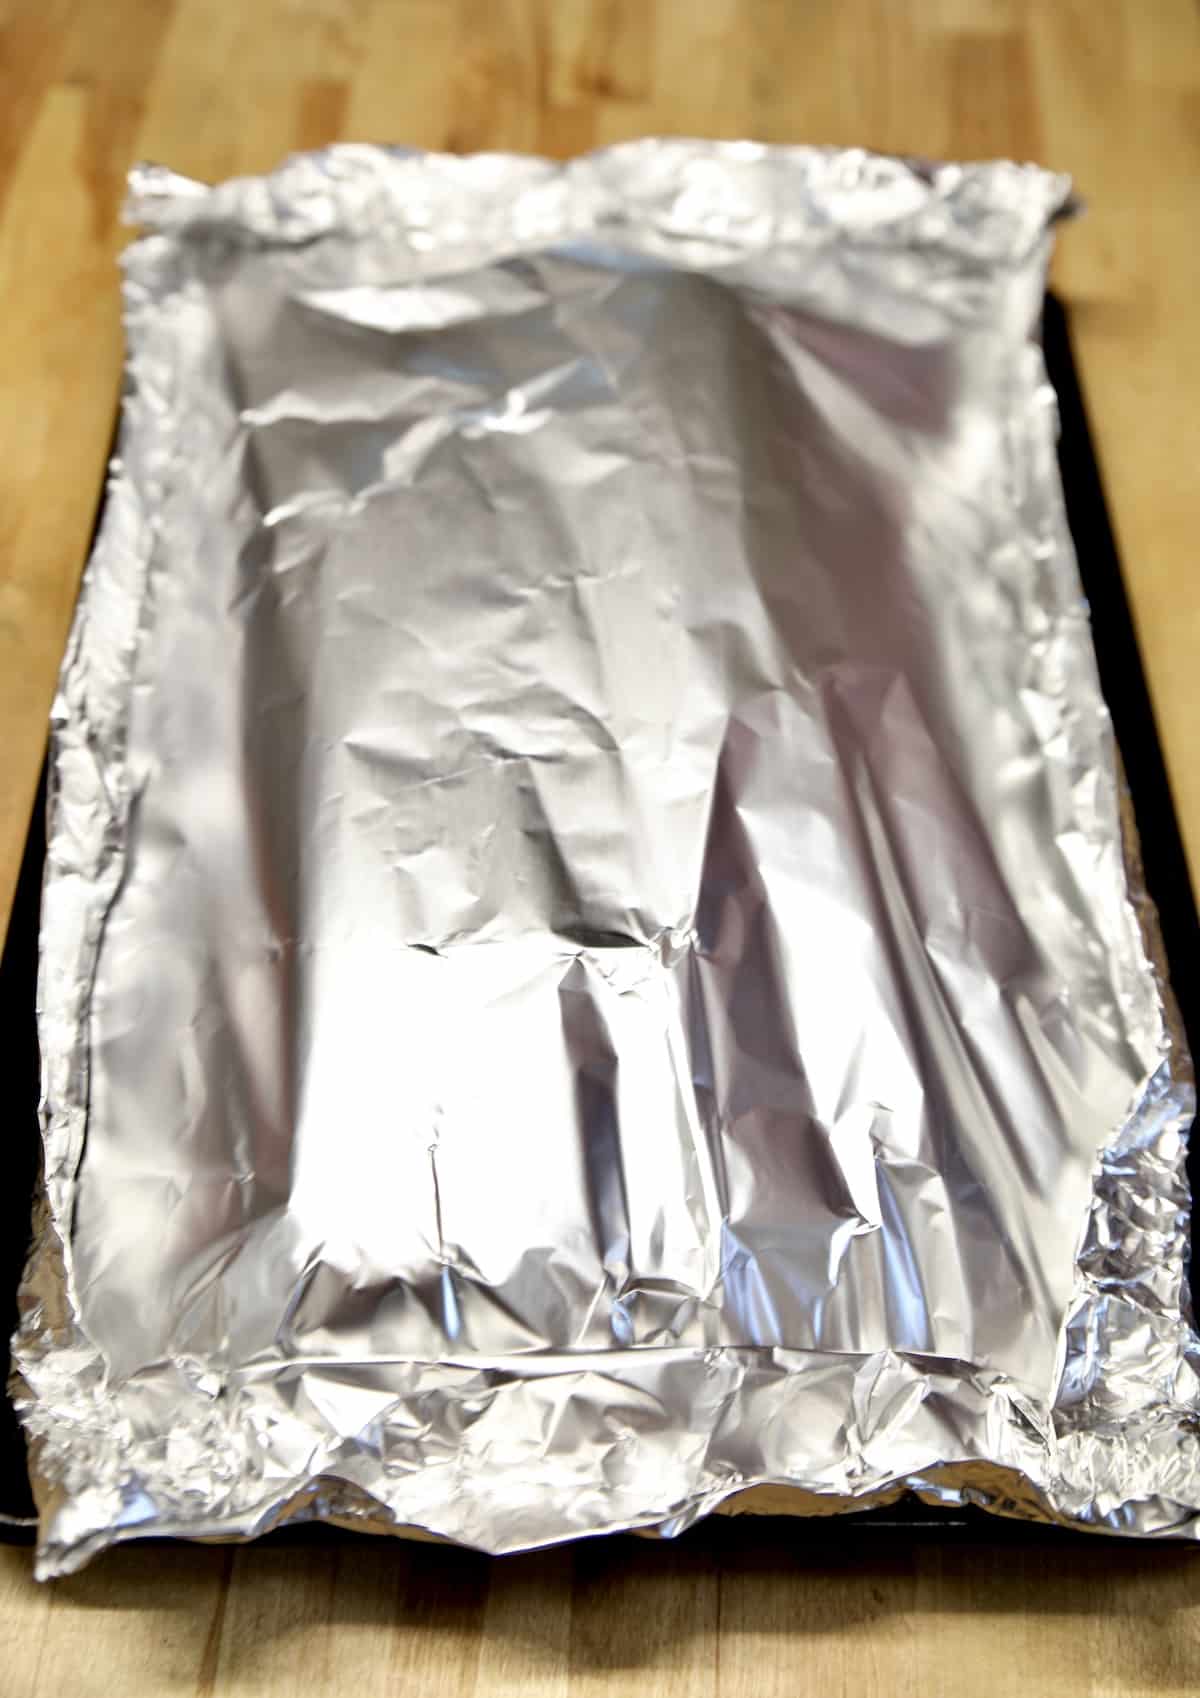 Foil packet of baby back ribs.